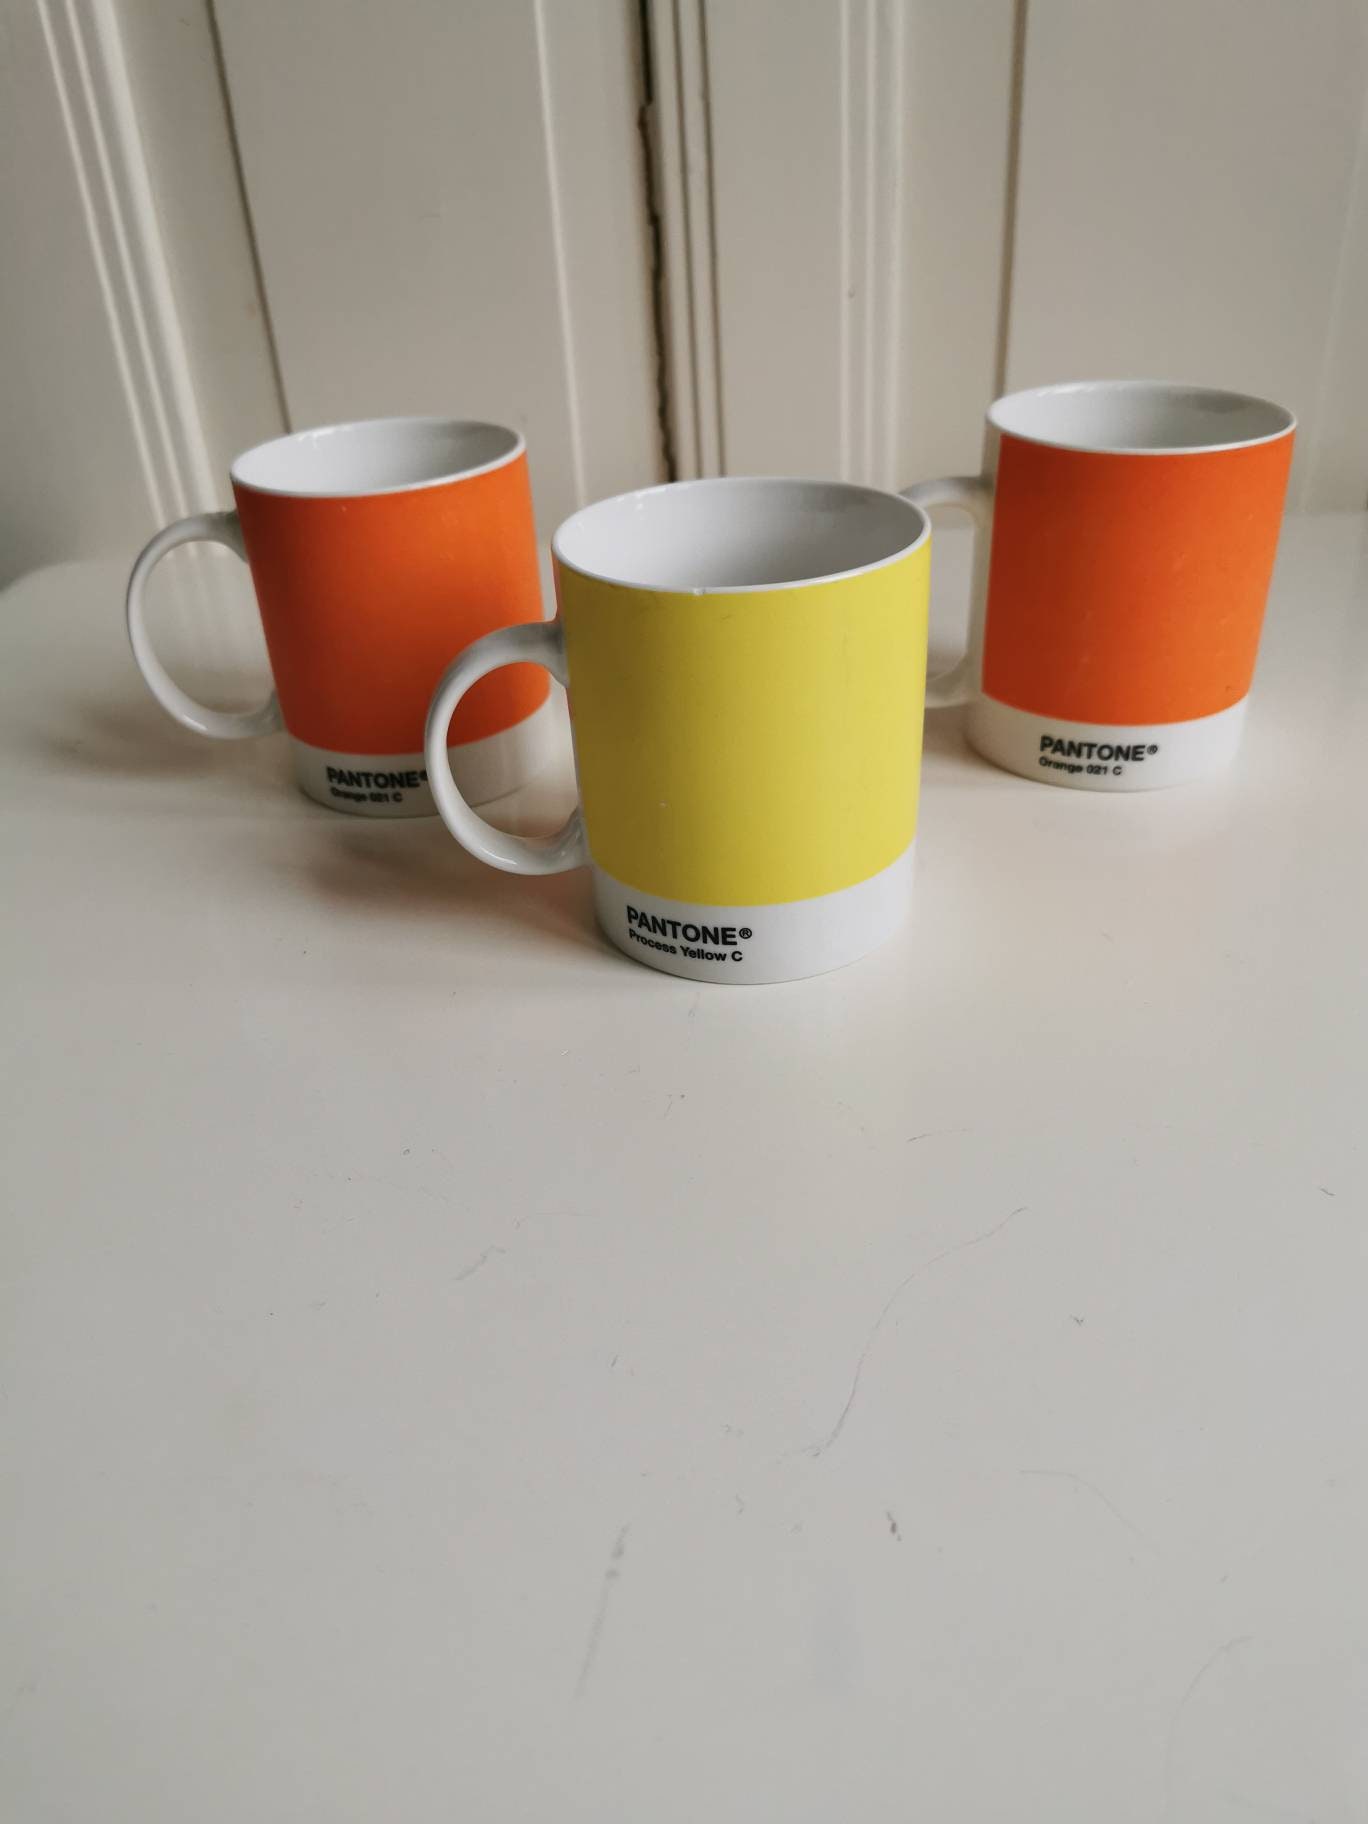 Set of 3 PANTONE Coffee Mugs 1 Process Yellow C and 2 Orange 021 C.  Copenhagen Design. Mugs for an Artist. in a Good Vintage Condition. 